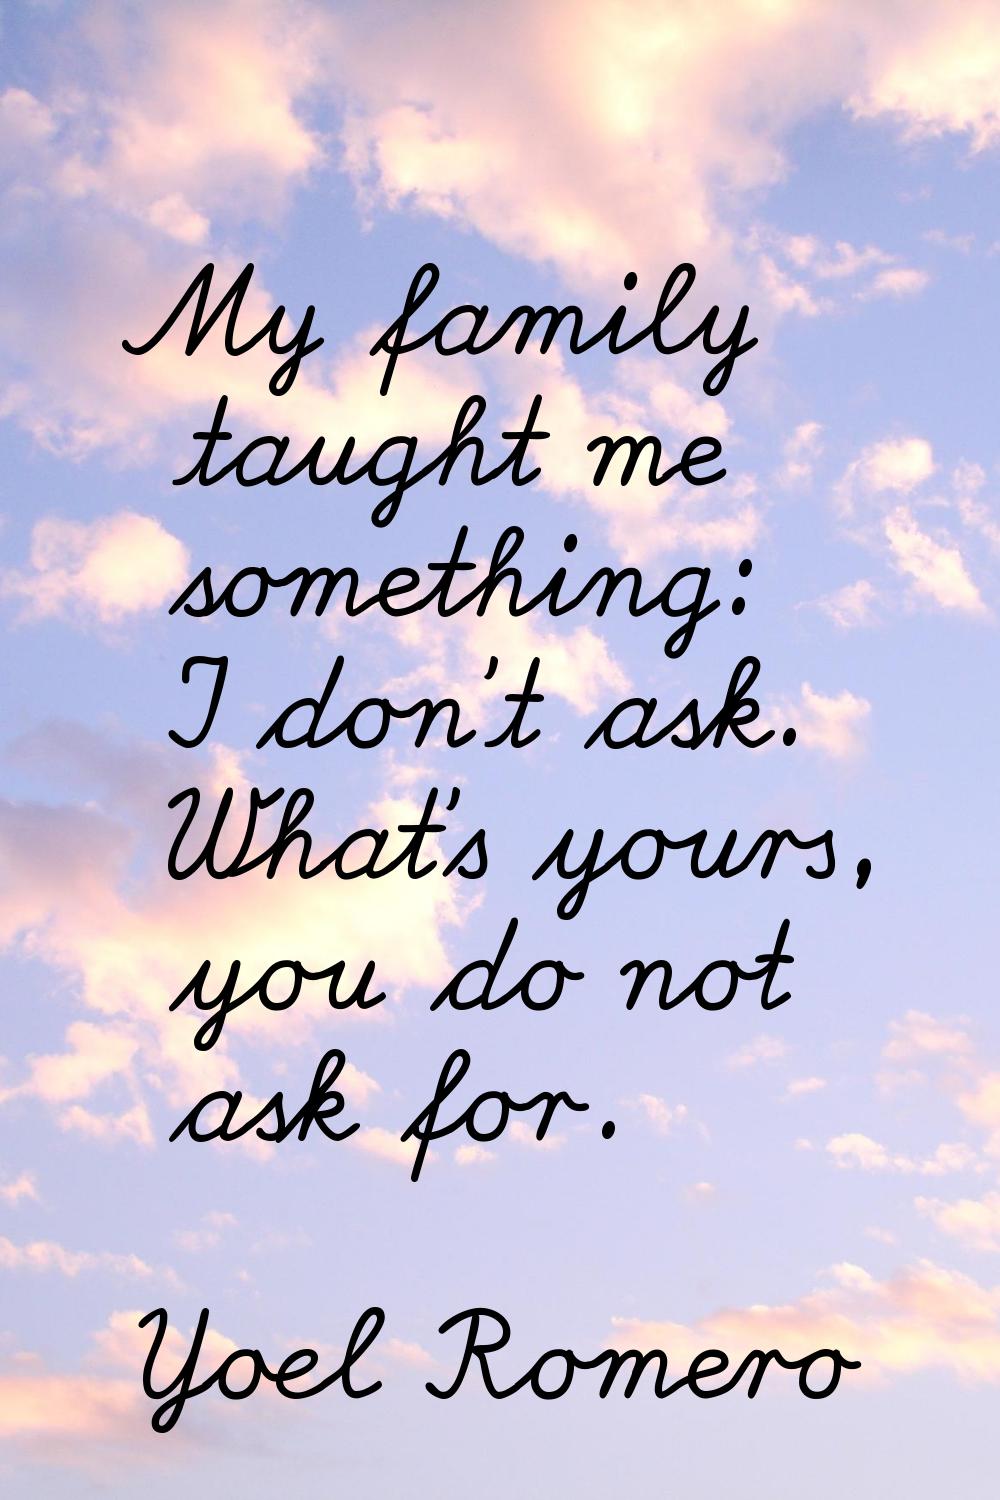 My family taught me something: I don't ask. What's yours, you do not ask for.